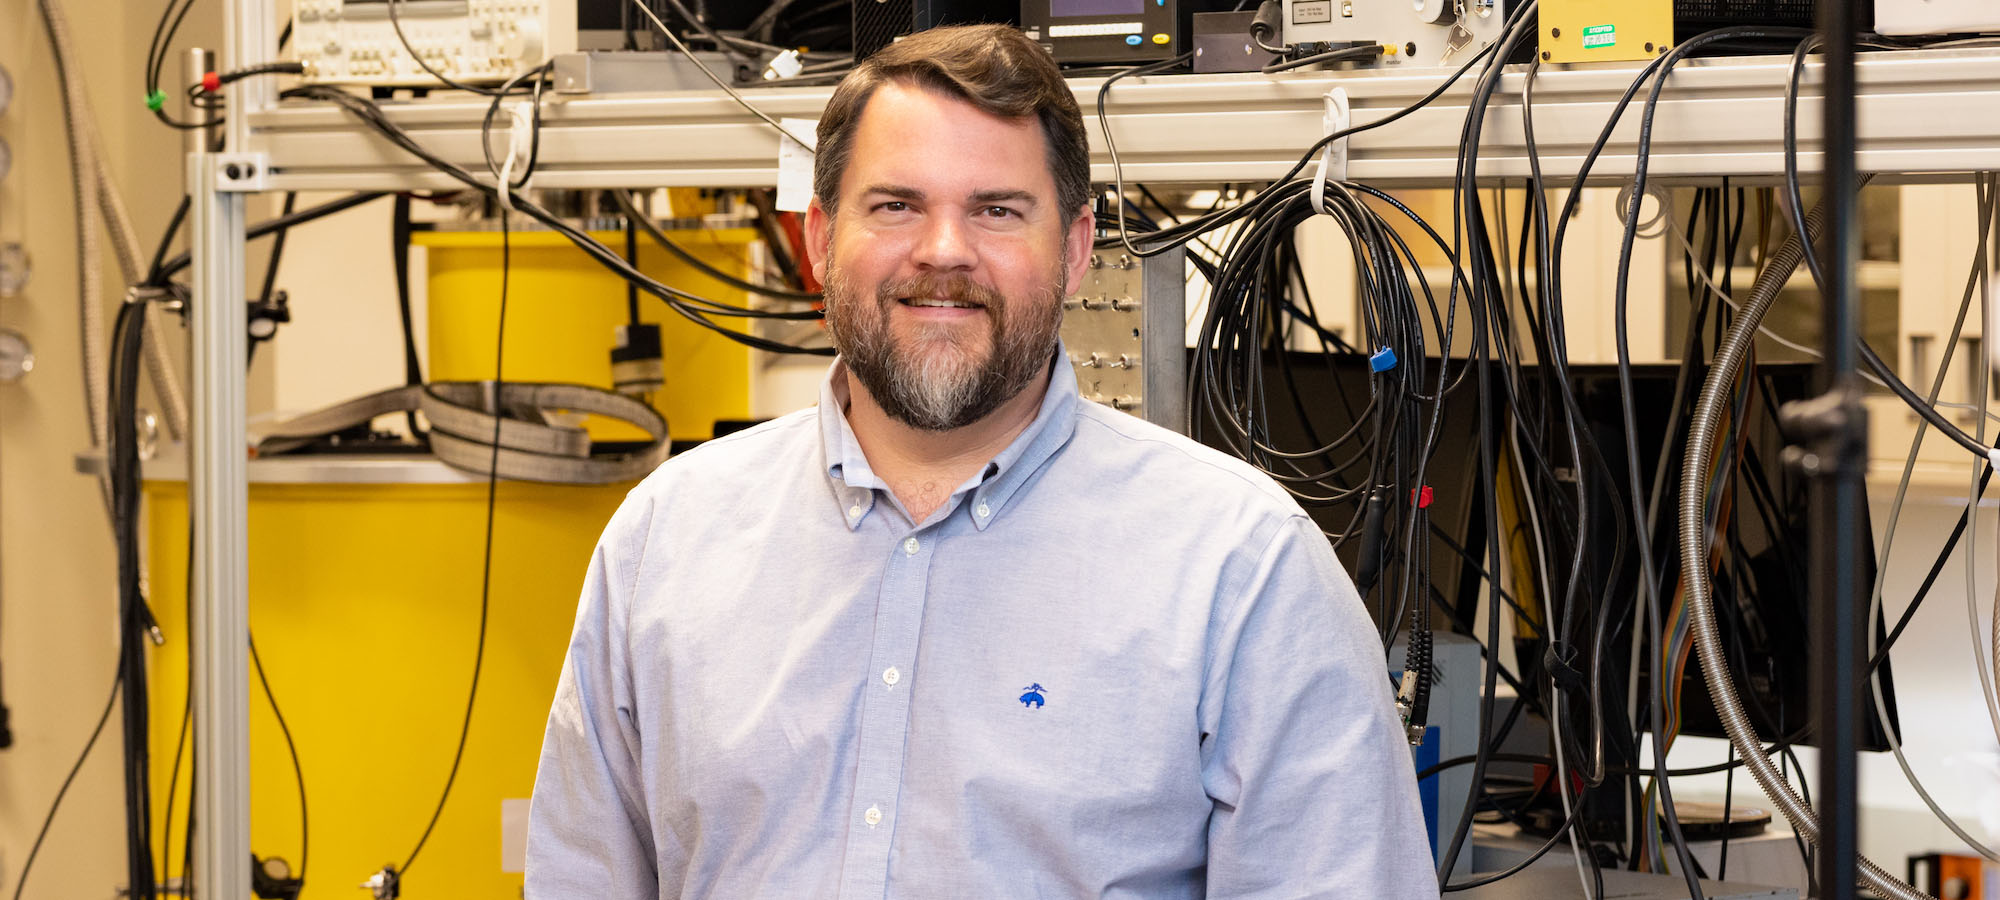 Hugh Churchill, who works with nanoscale materials and quantum technologies, says his professional mission was to come back to his home state to improve the scientific research and education in Arkansas.